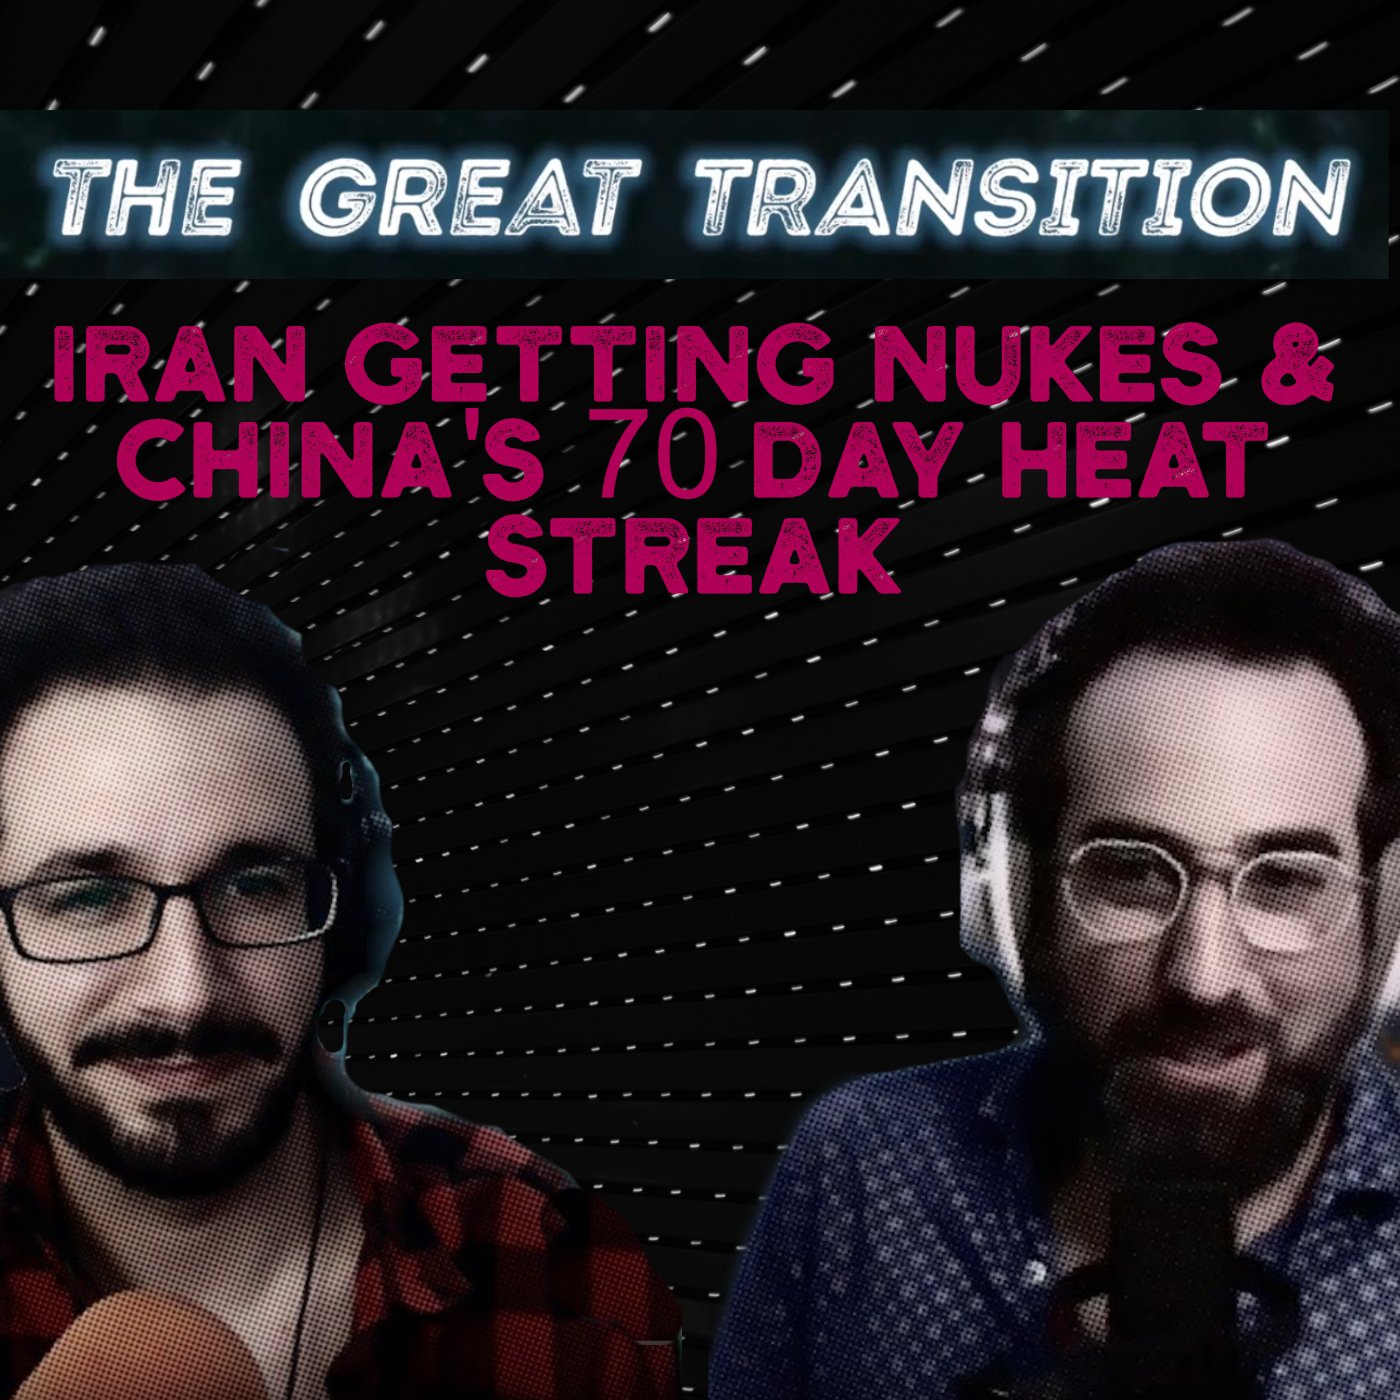 The Great Transition - Iran Getting Nukes & China's 70 Day Heat Streak